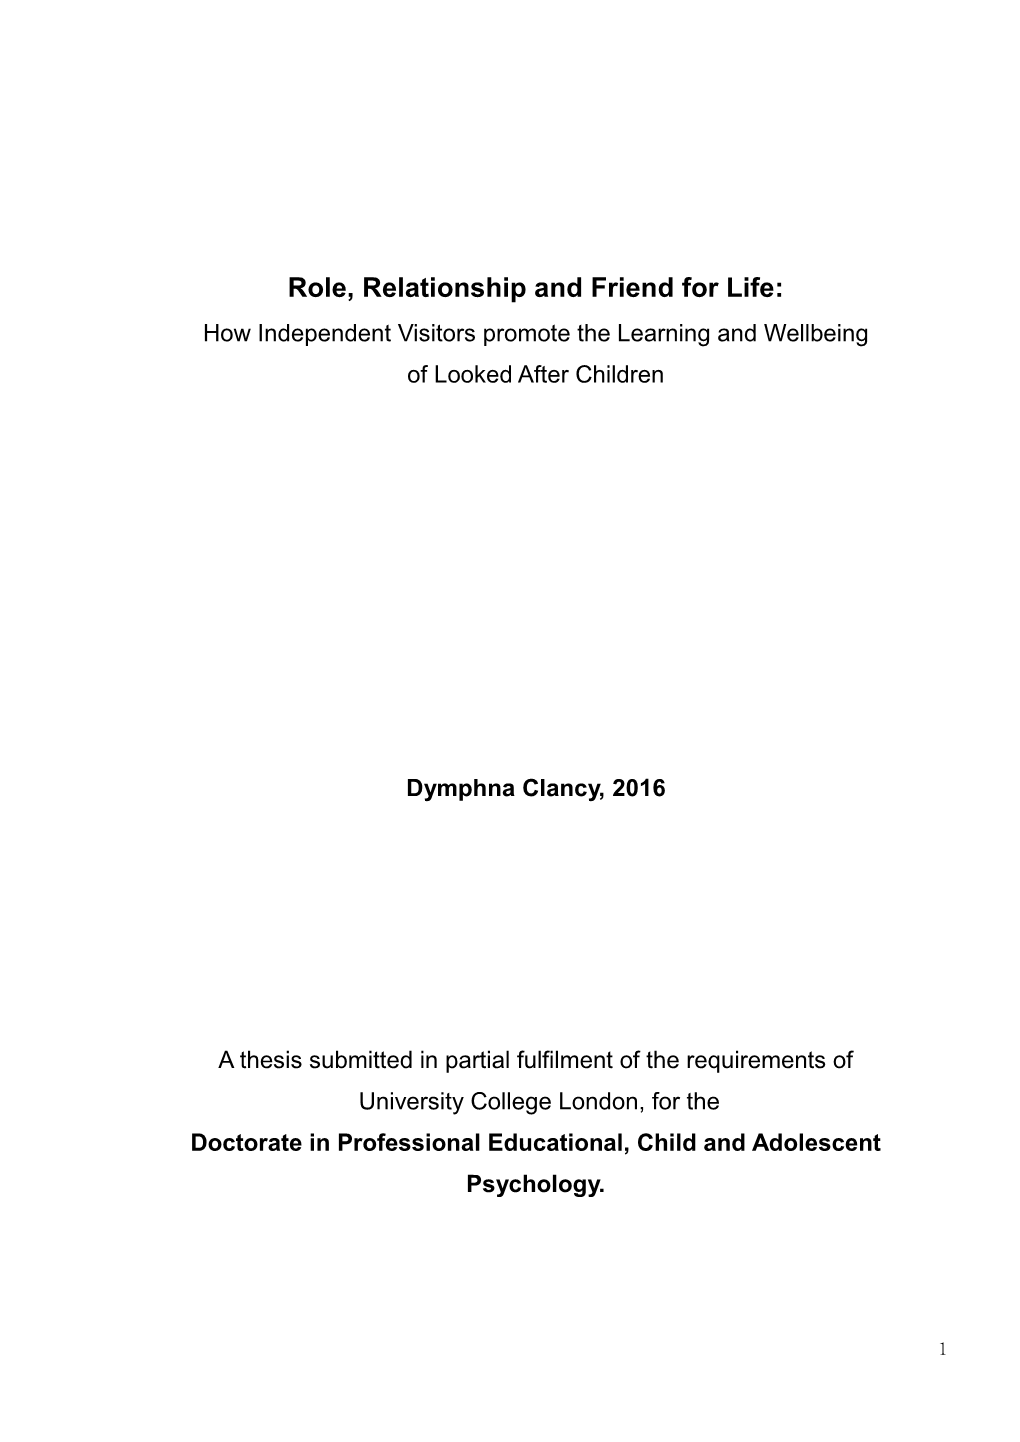 Role, Relationship and Friend for Life: How Independent Visitors Promote the Learning and Wellbeing of Looked After Children